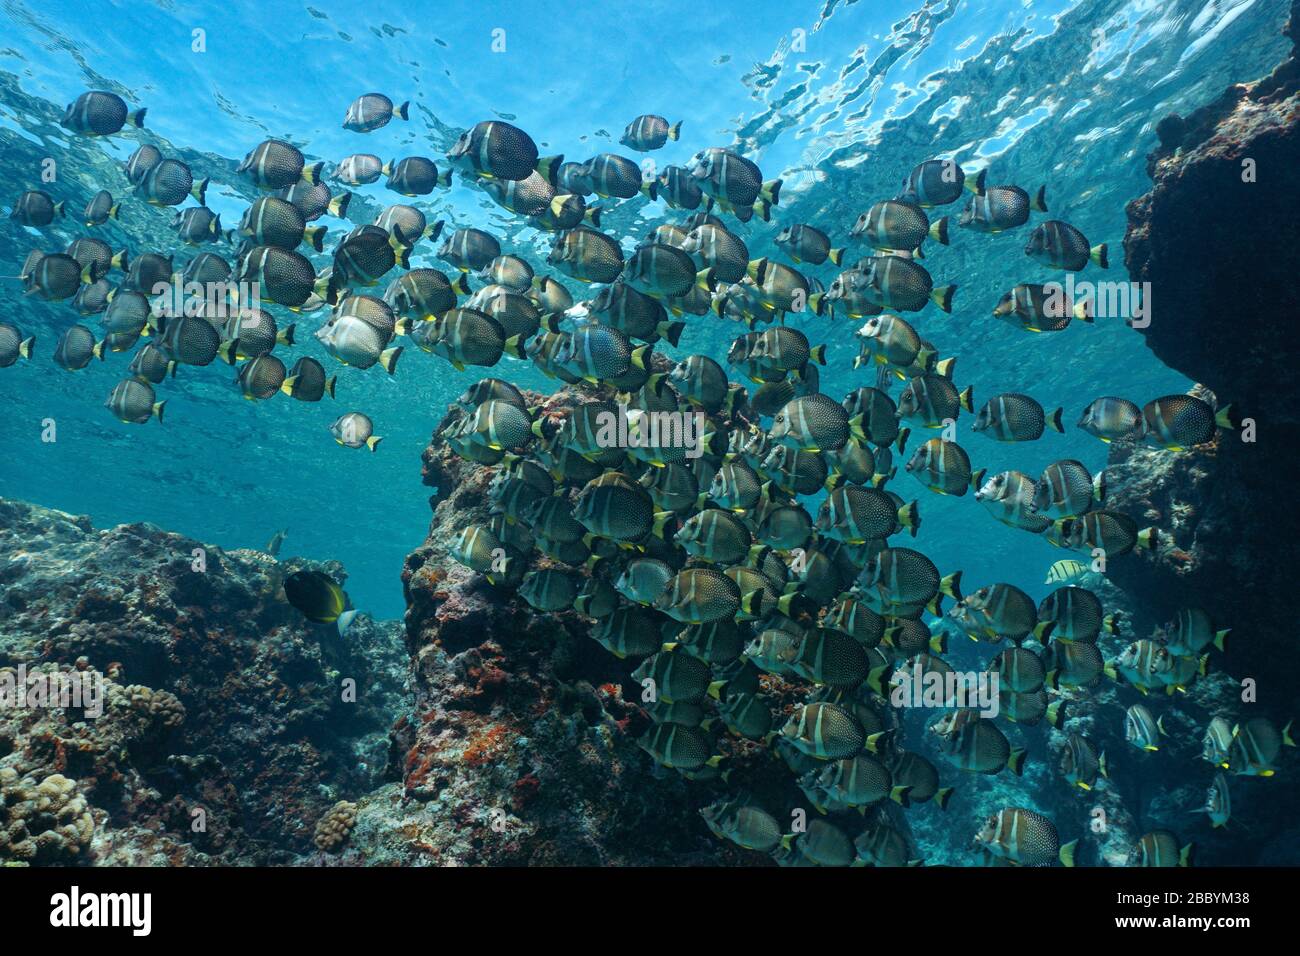 School of fish, whitespotted surgeonfish, underwater in the Pacific ocean, French Polynesia, Oceania Stock Photo